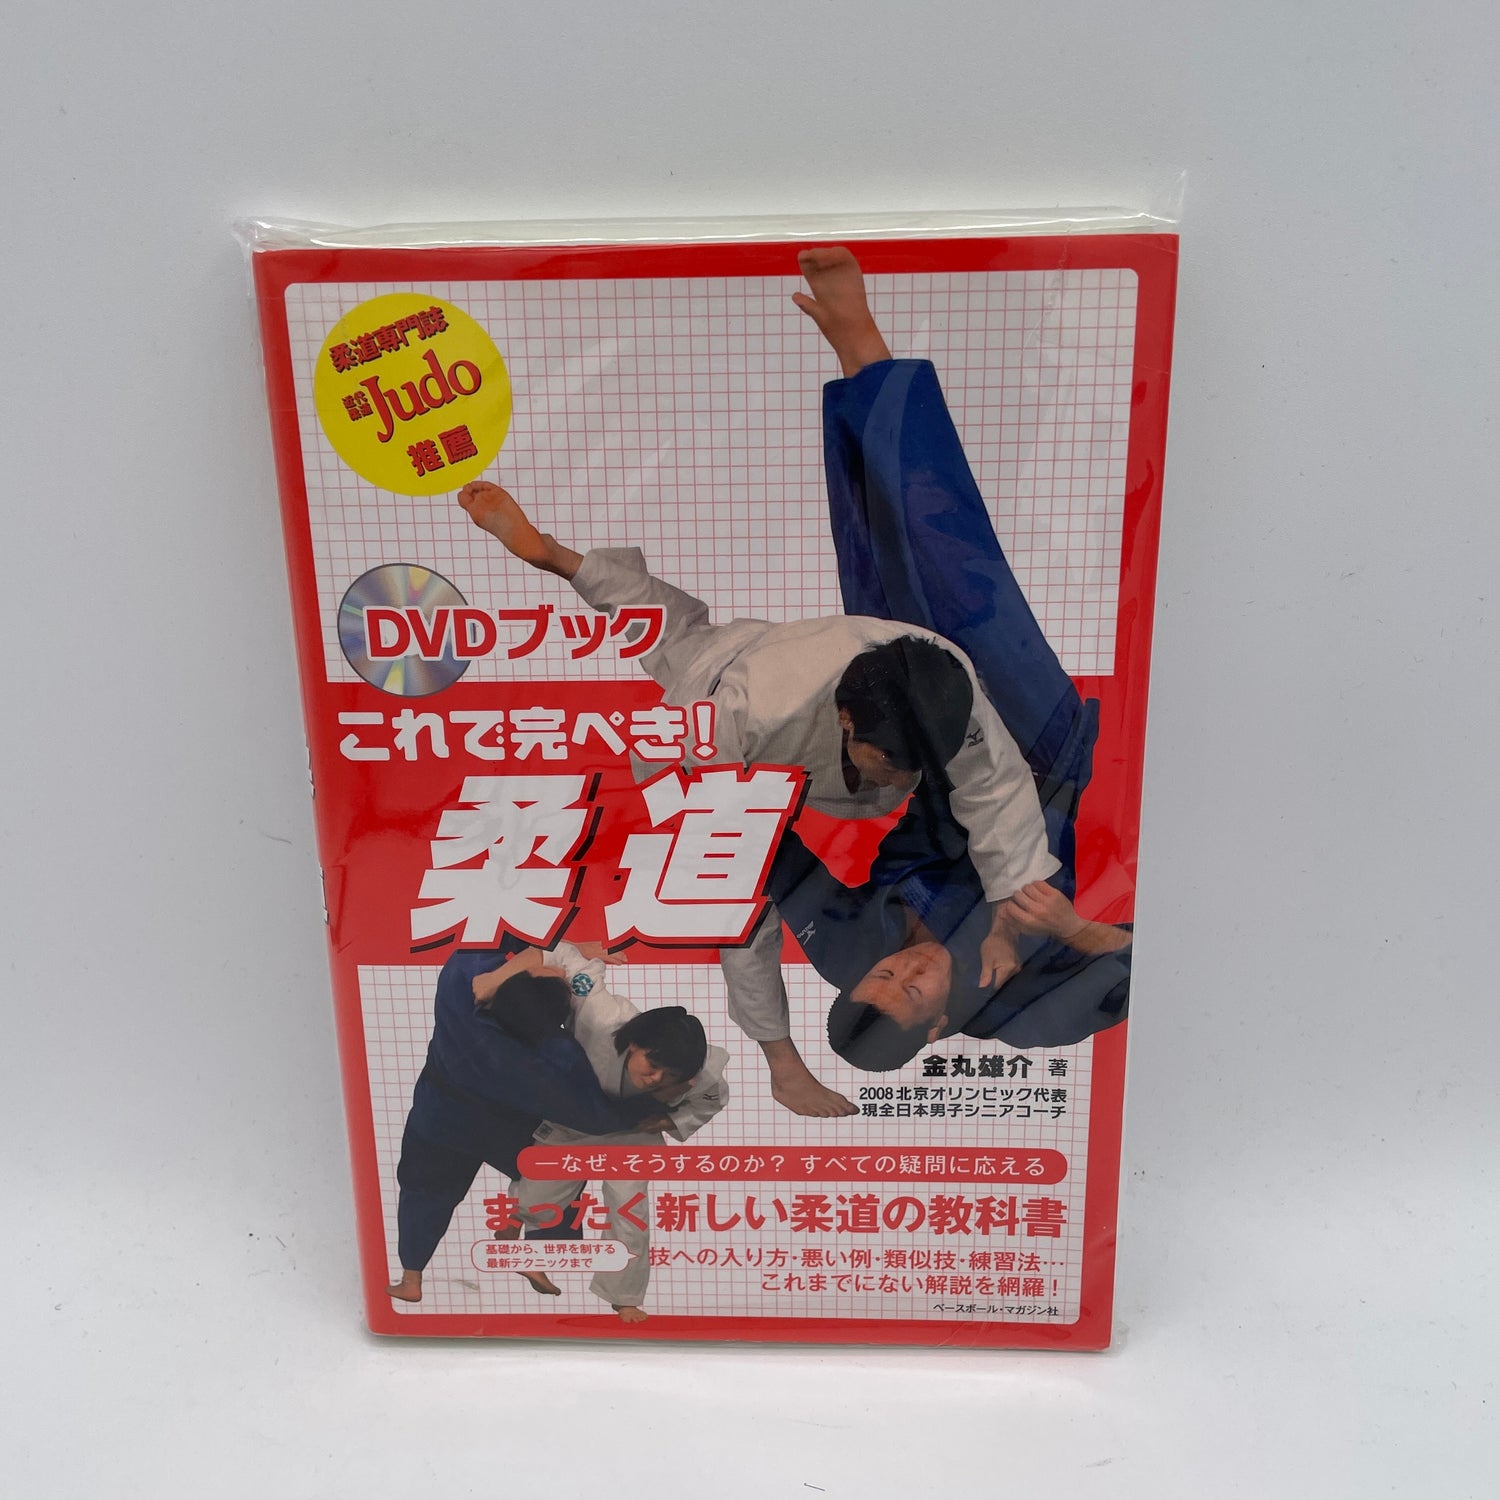 This is Perfect Judo Book & DVD by Yusuke Kanemaru (Preowned)